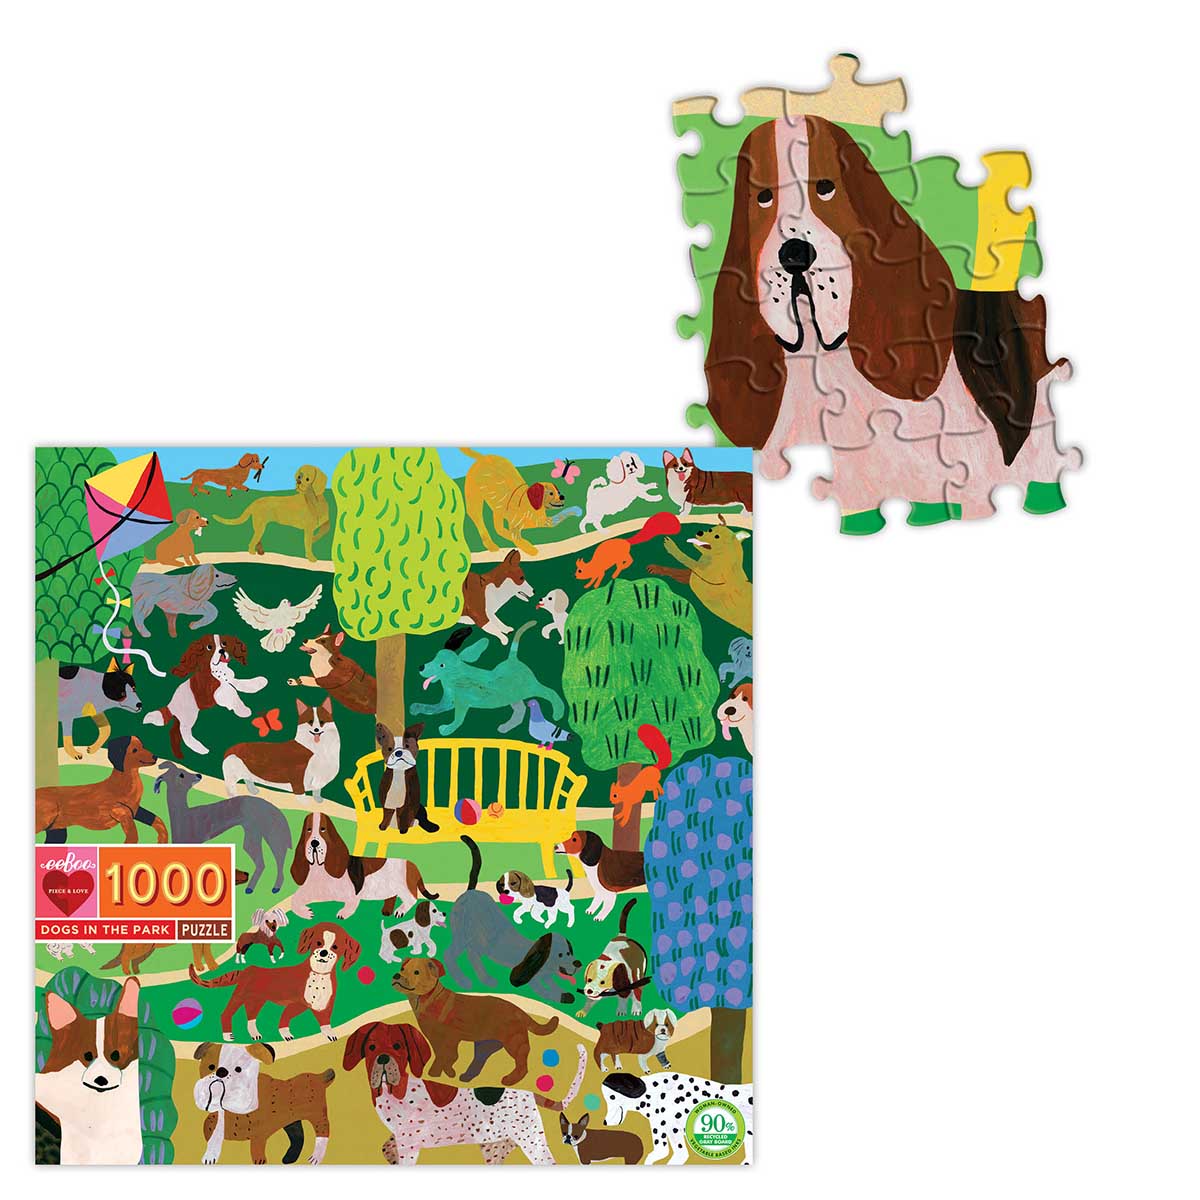 Dogs in the Park - Scratch and Dent Dogs Jigsaw Puzzle